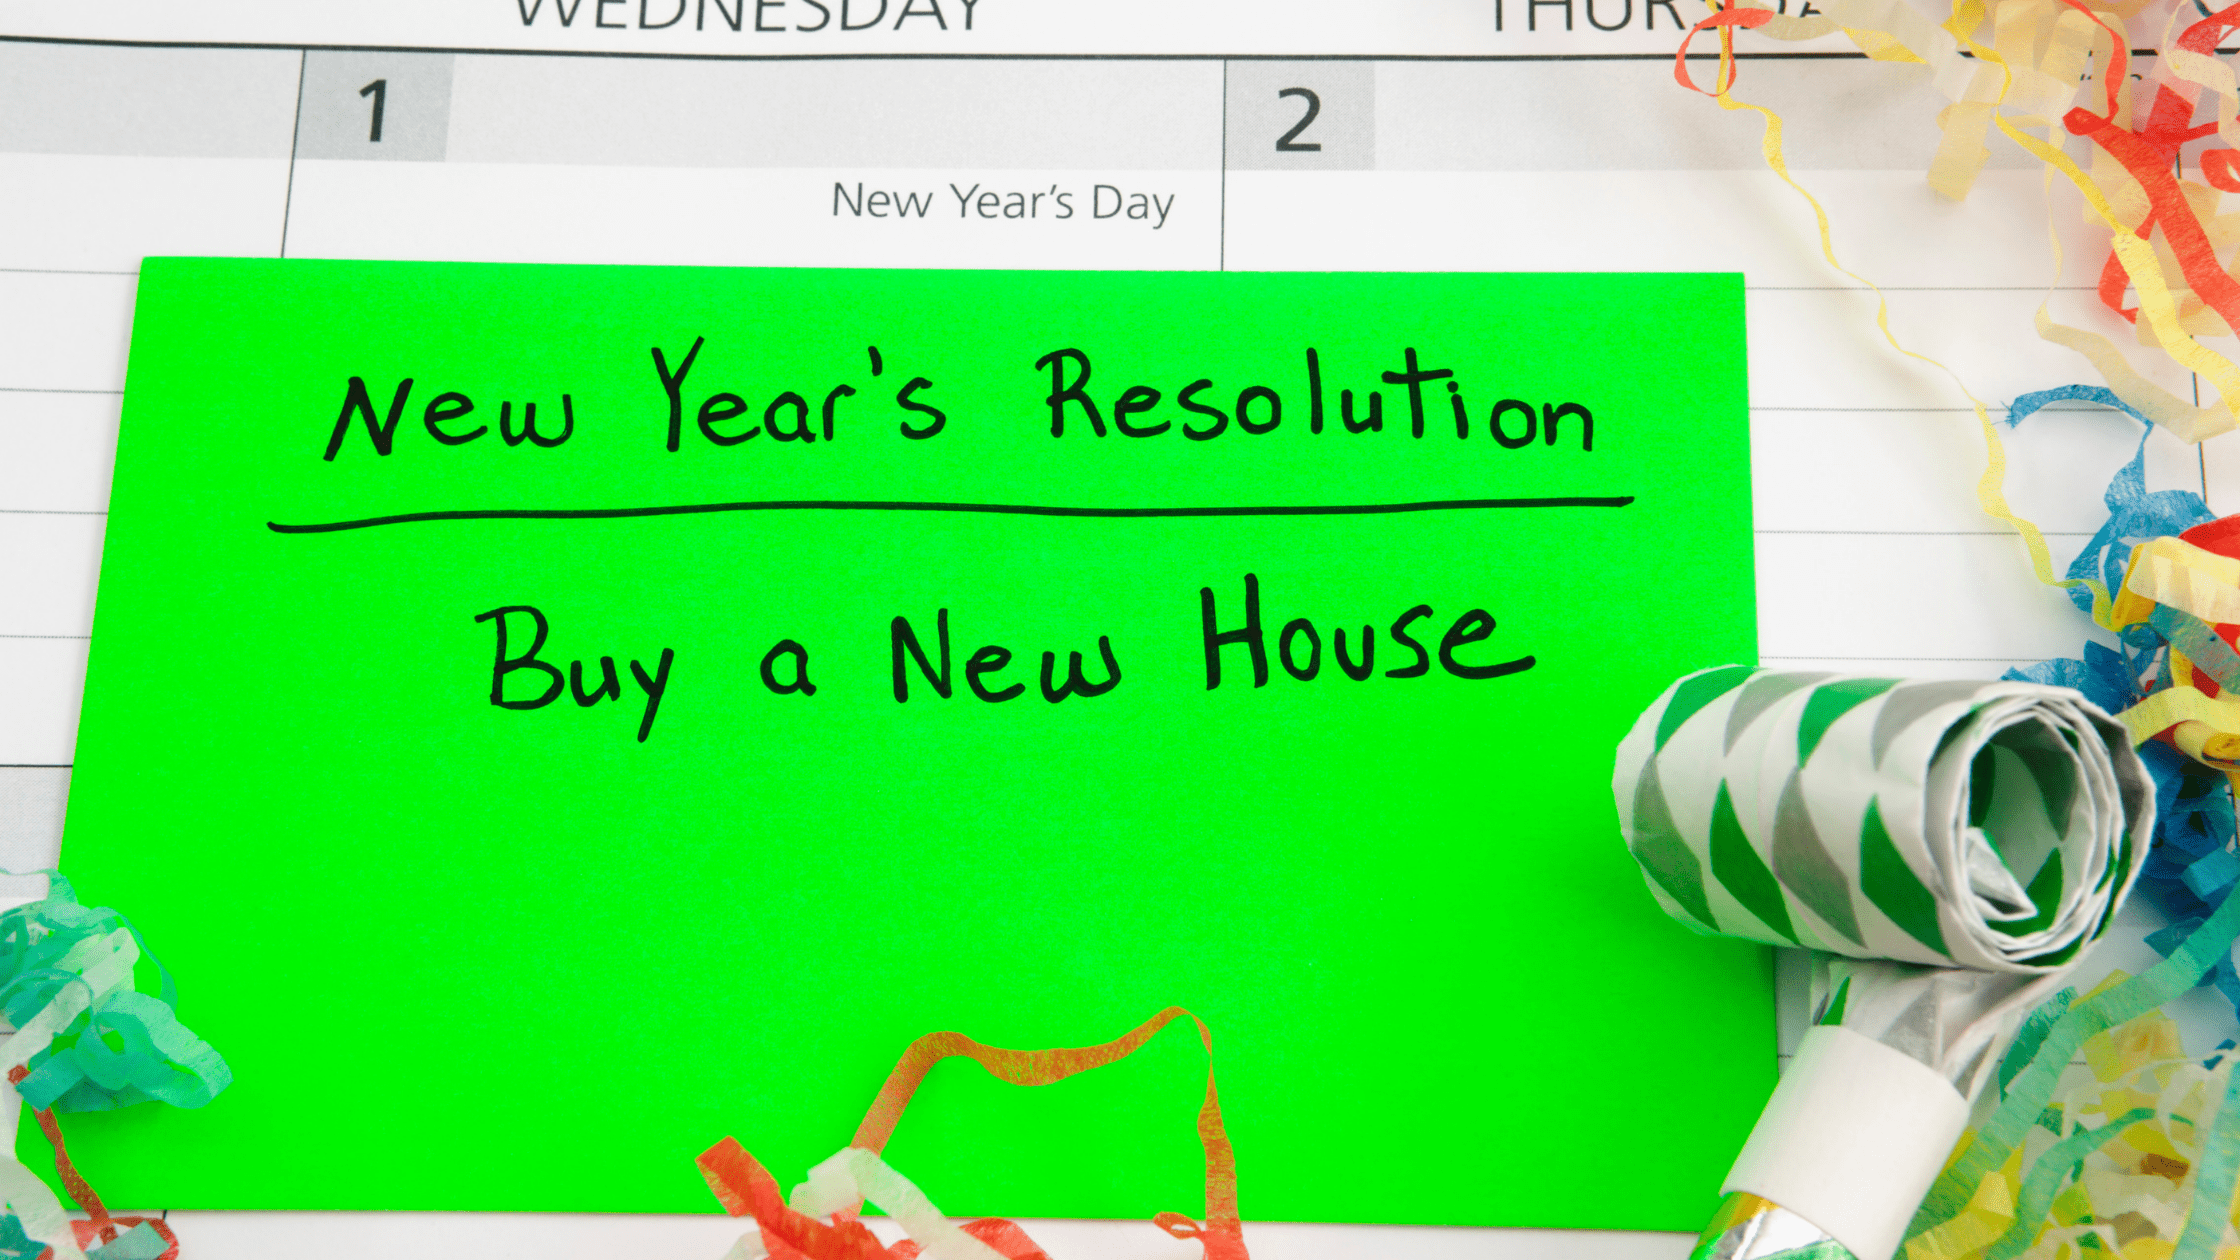 your new year's resolution to buy a home - what do you need to plan for? when's the best time of year?